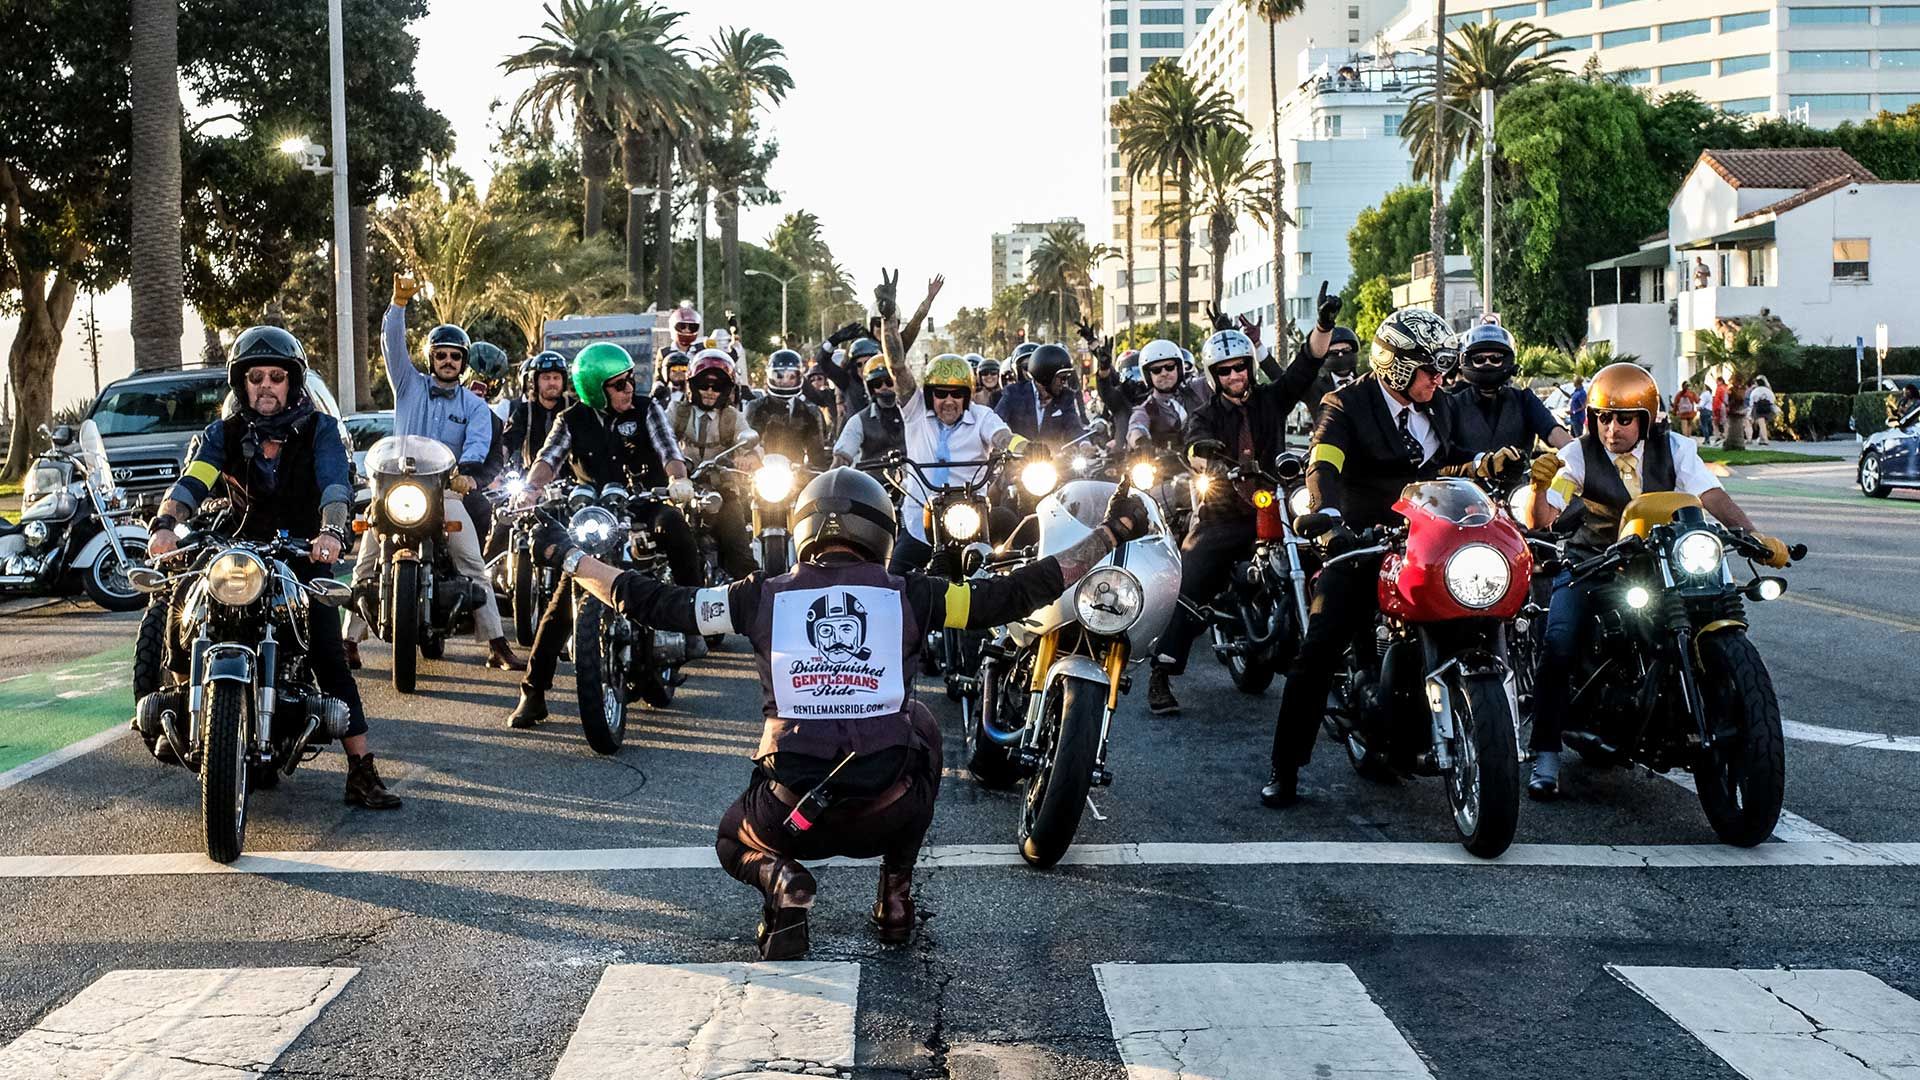 A group of motorcycle riders line up on the starting line of The Distinguished Gentleman's Ride